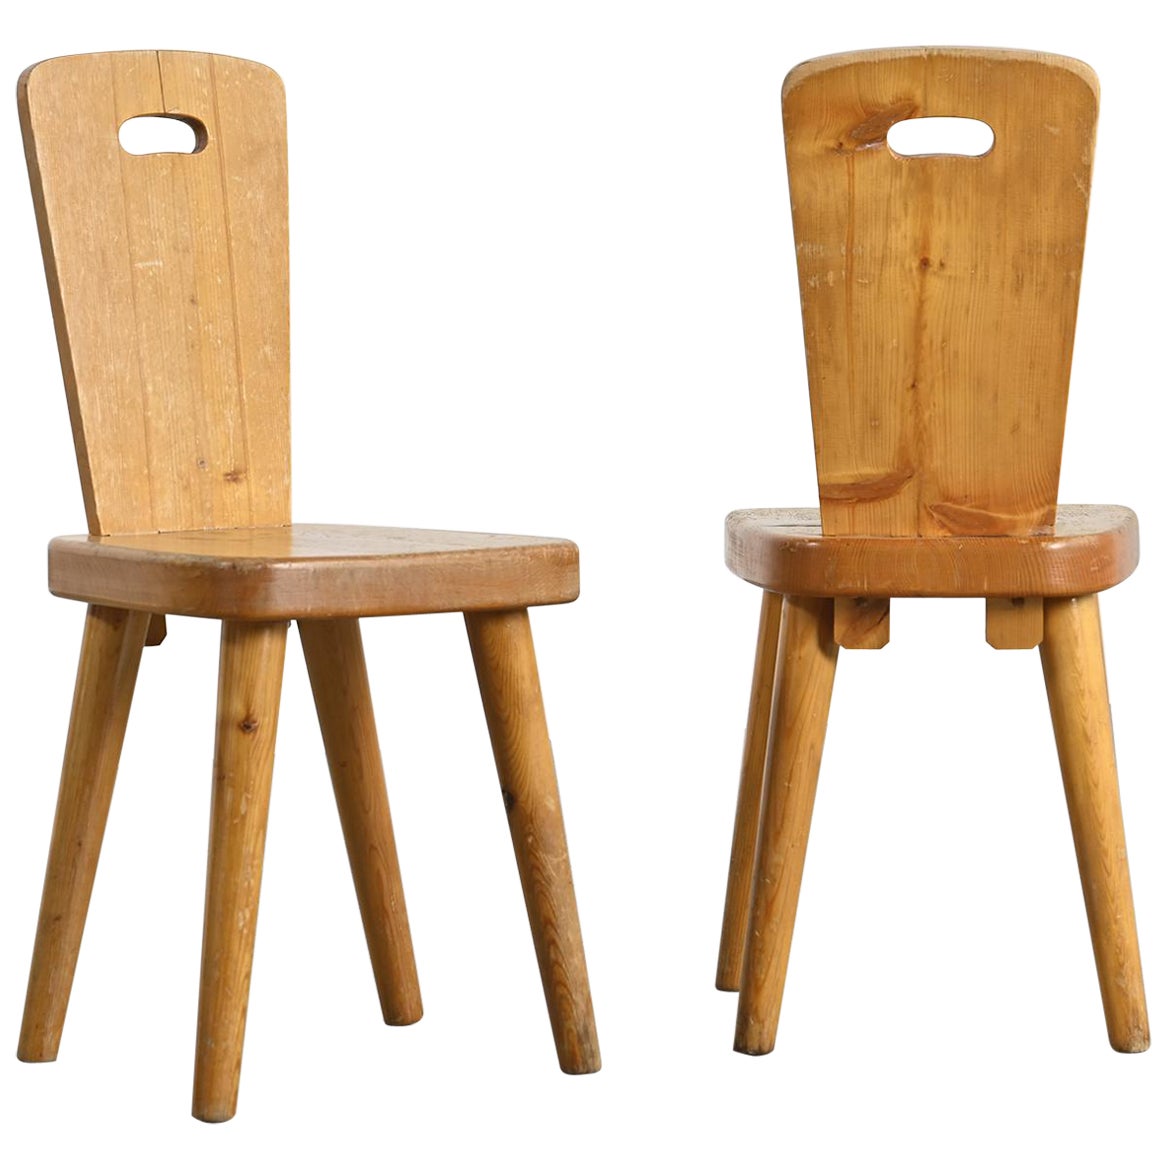 Pair of Chairs by Christian Durupt, Meribel 1960 For Sale